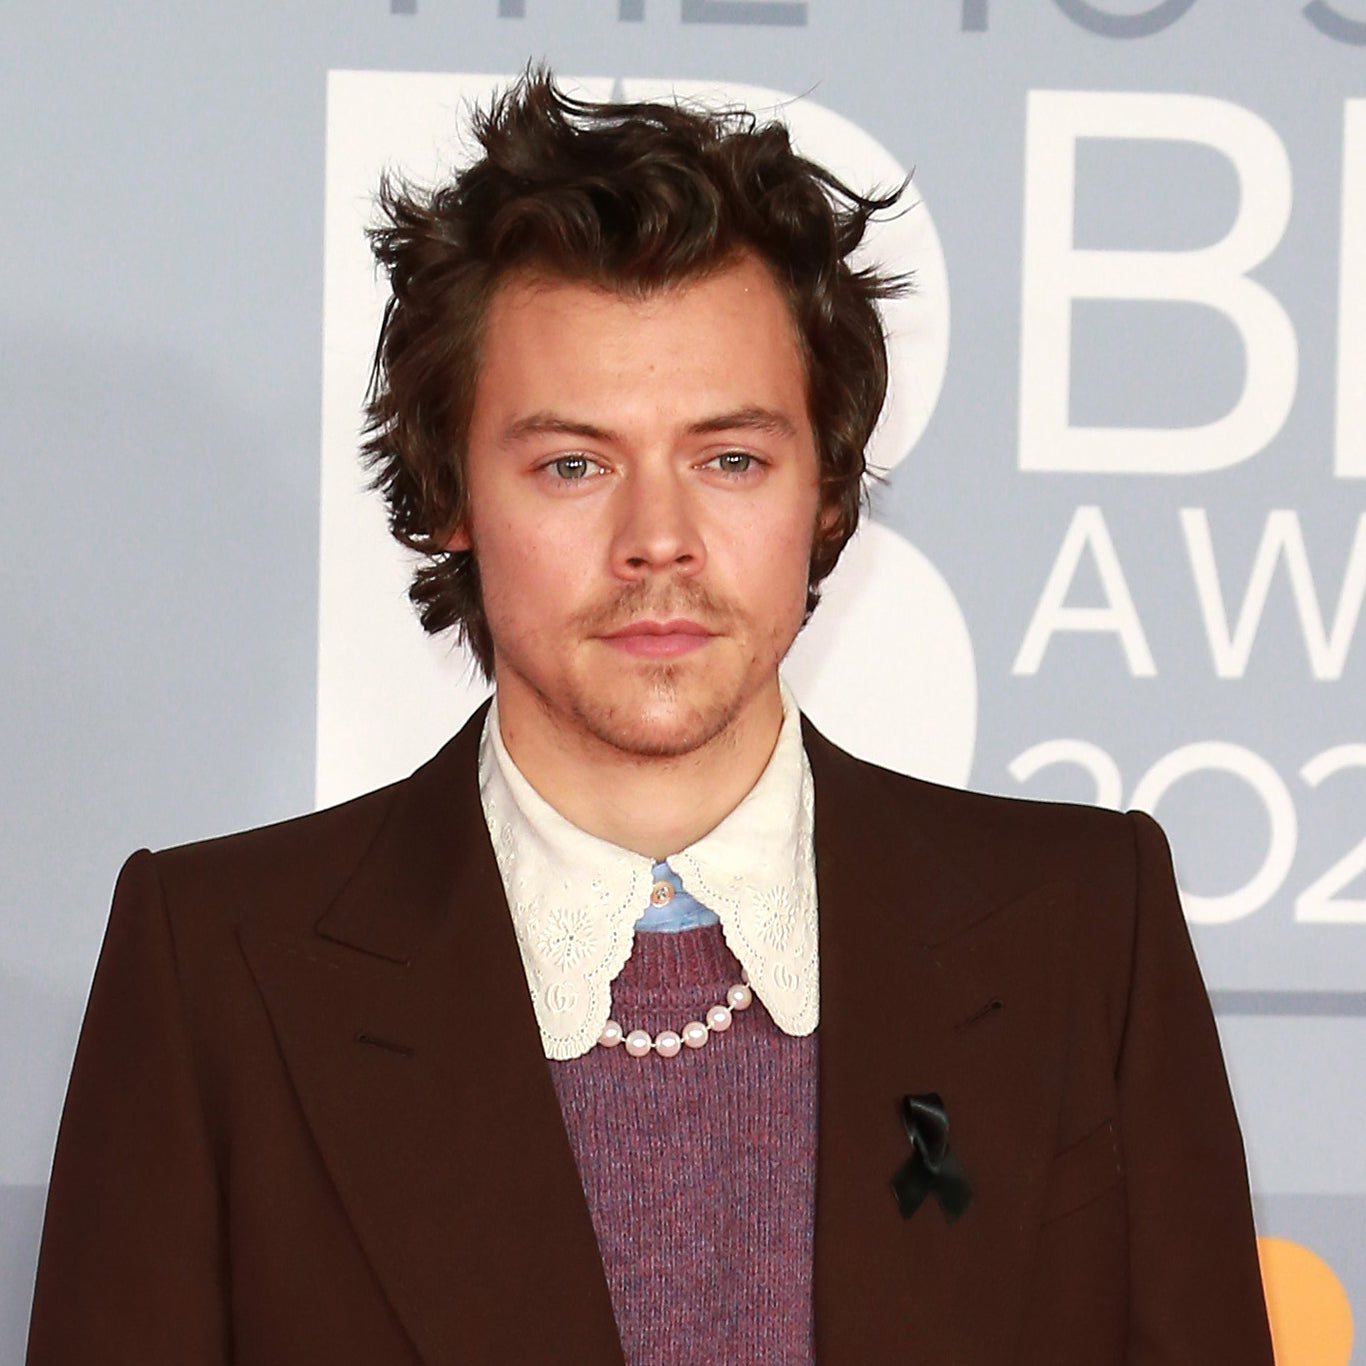 Harry Styles in Pearls: Get the Look with Necklaces & Earrings